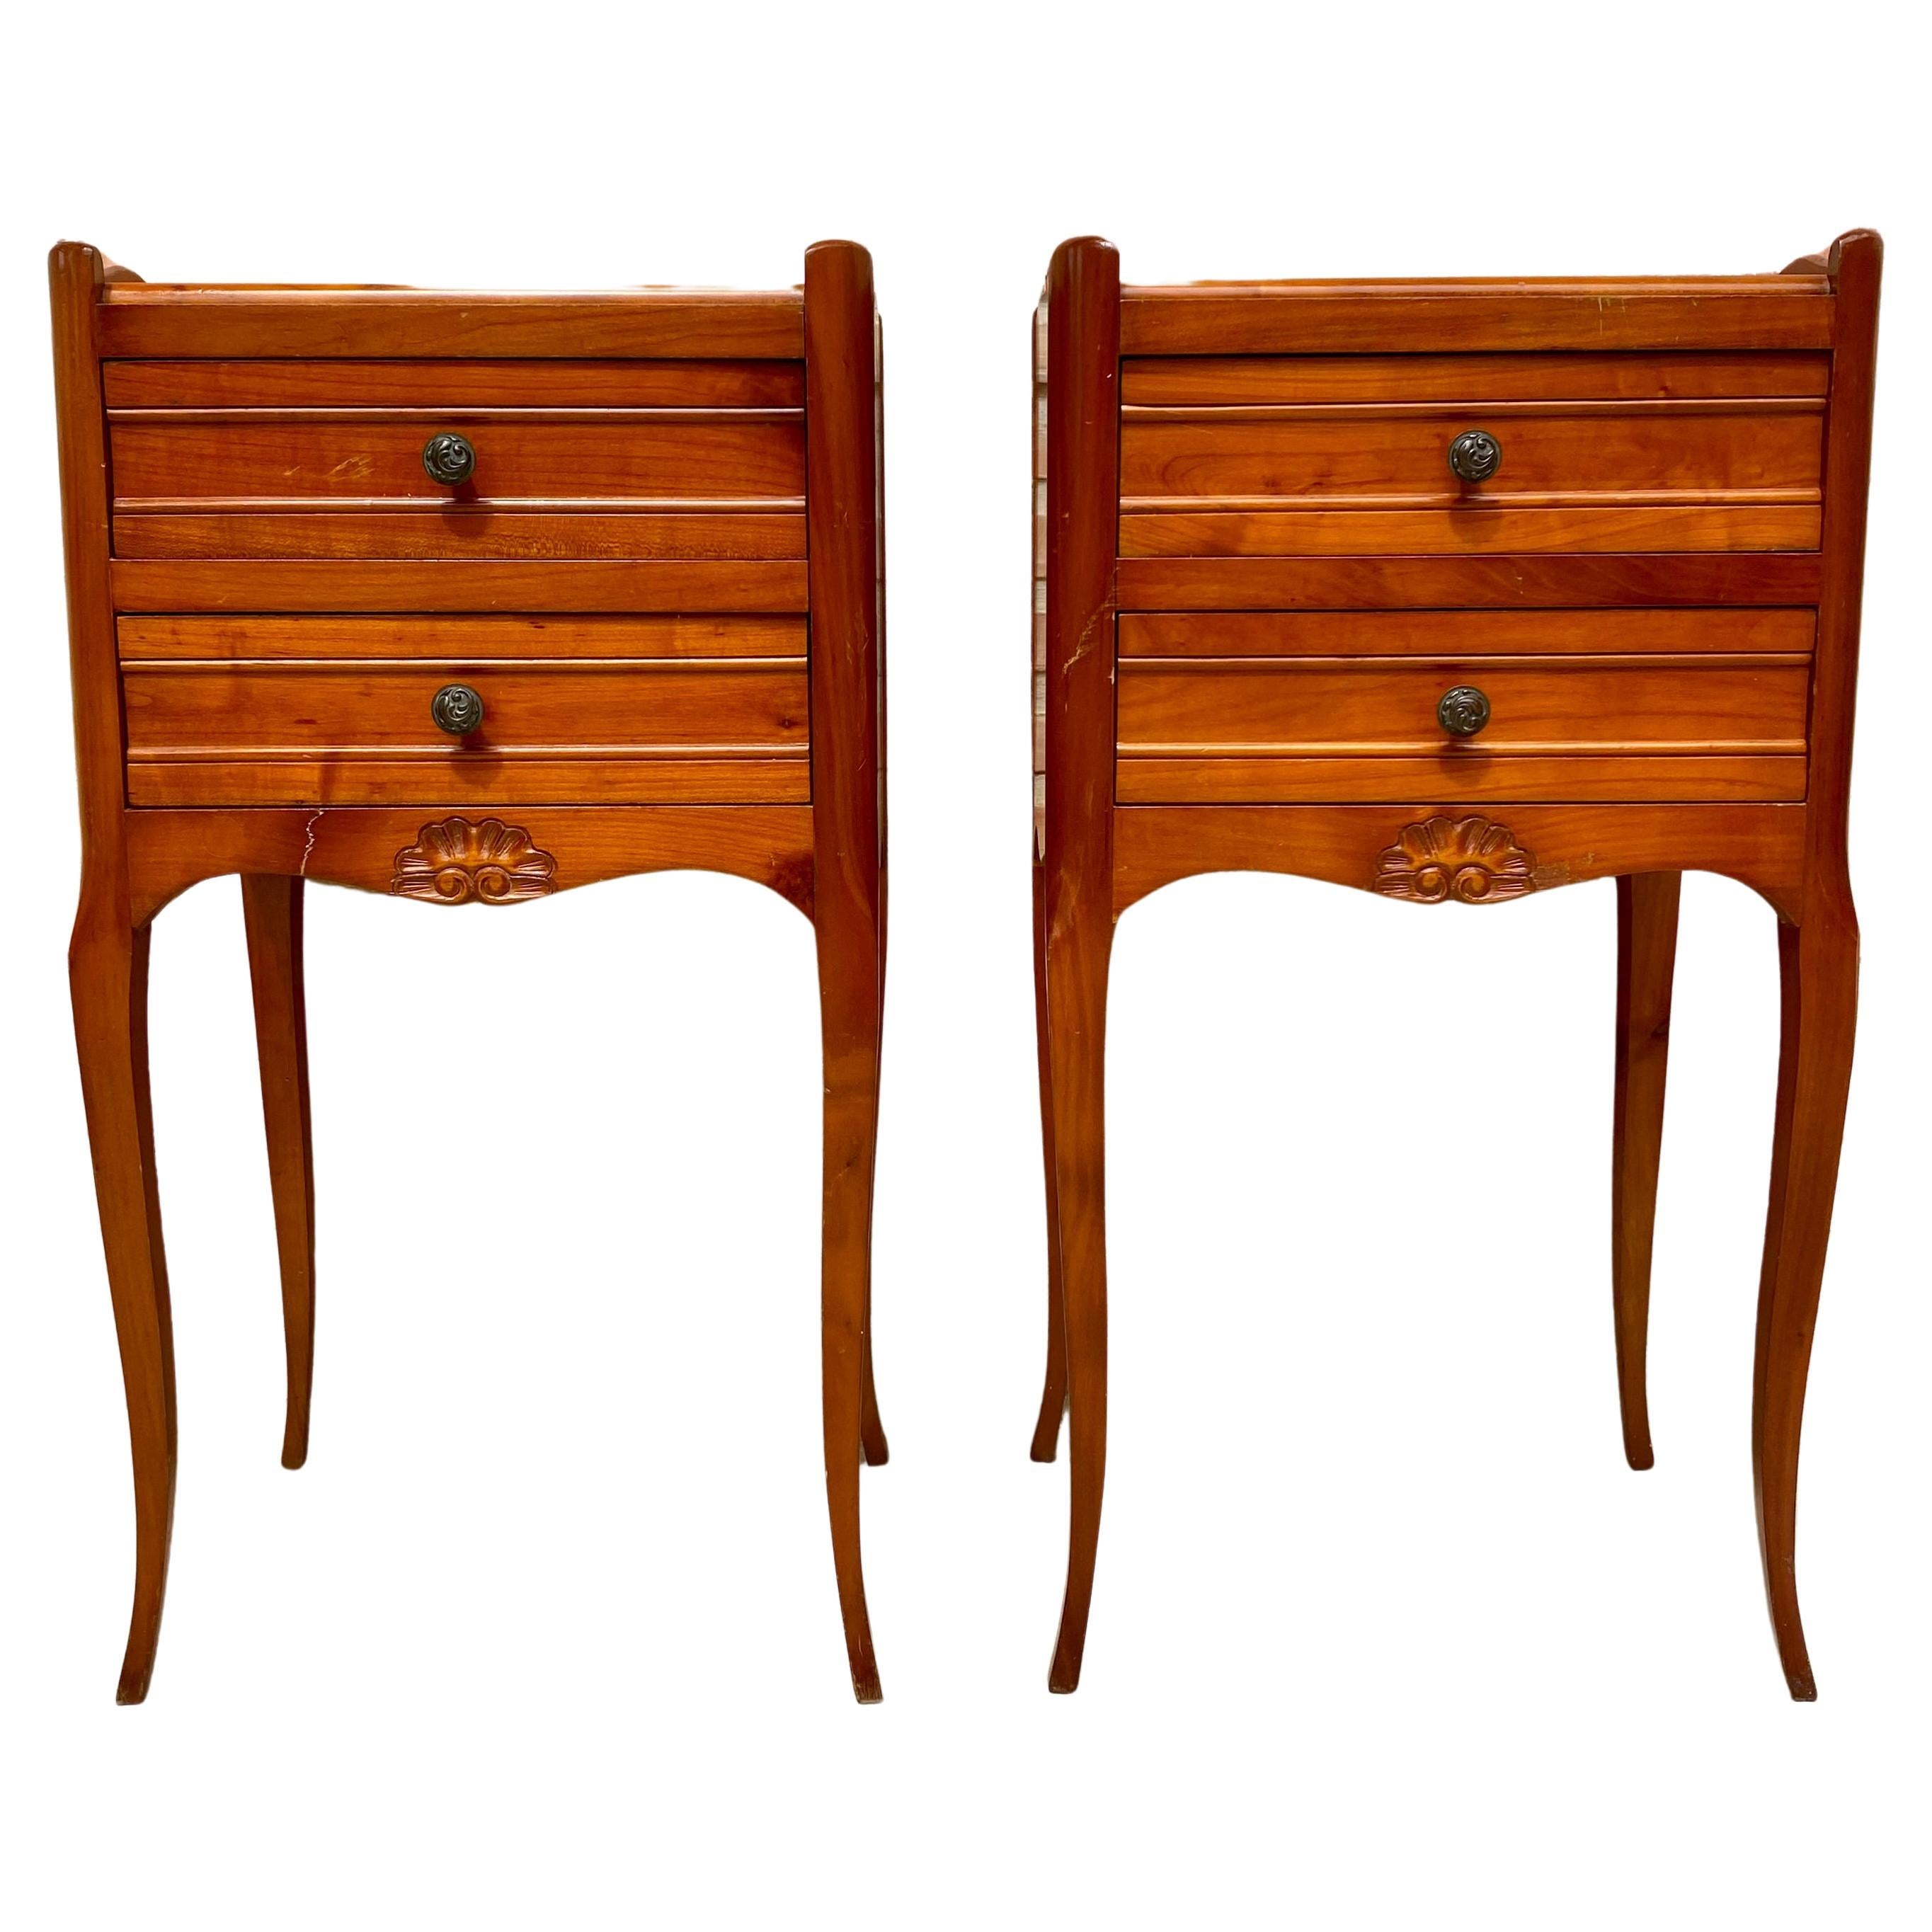 French Bedside Tables with Cabriole Legs, 1950s, Set of 2